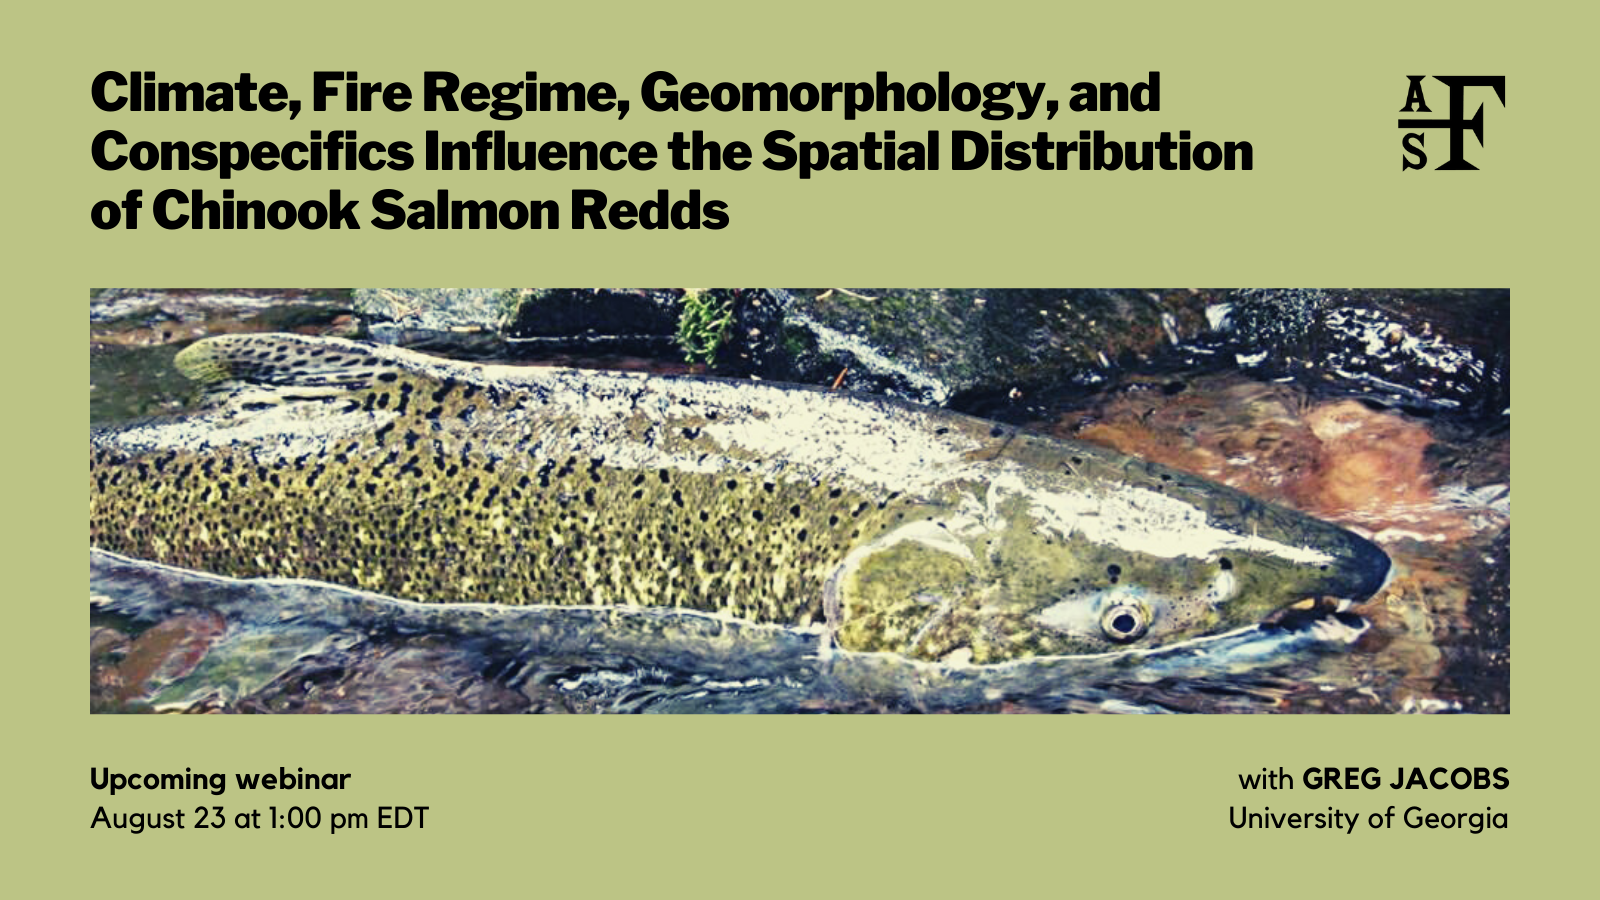 Climate, Fire Regime, Geomorphology, and Conspecifics Influence the Spatial Distribution of Chinook Salmon Redds